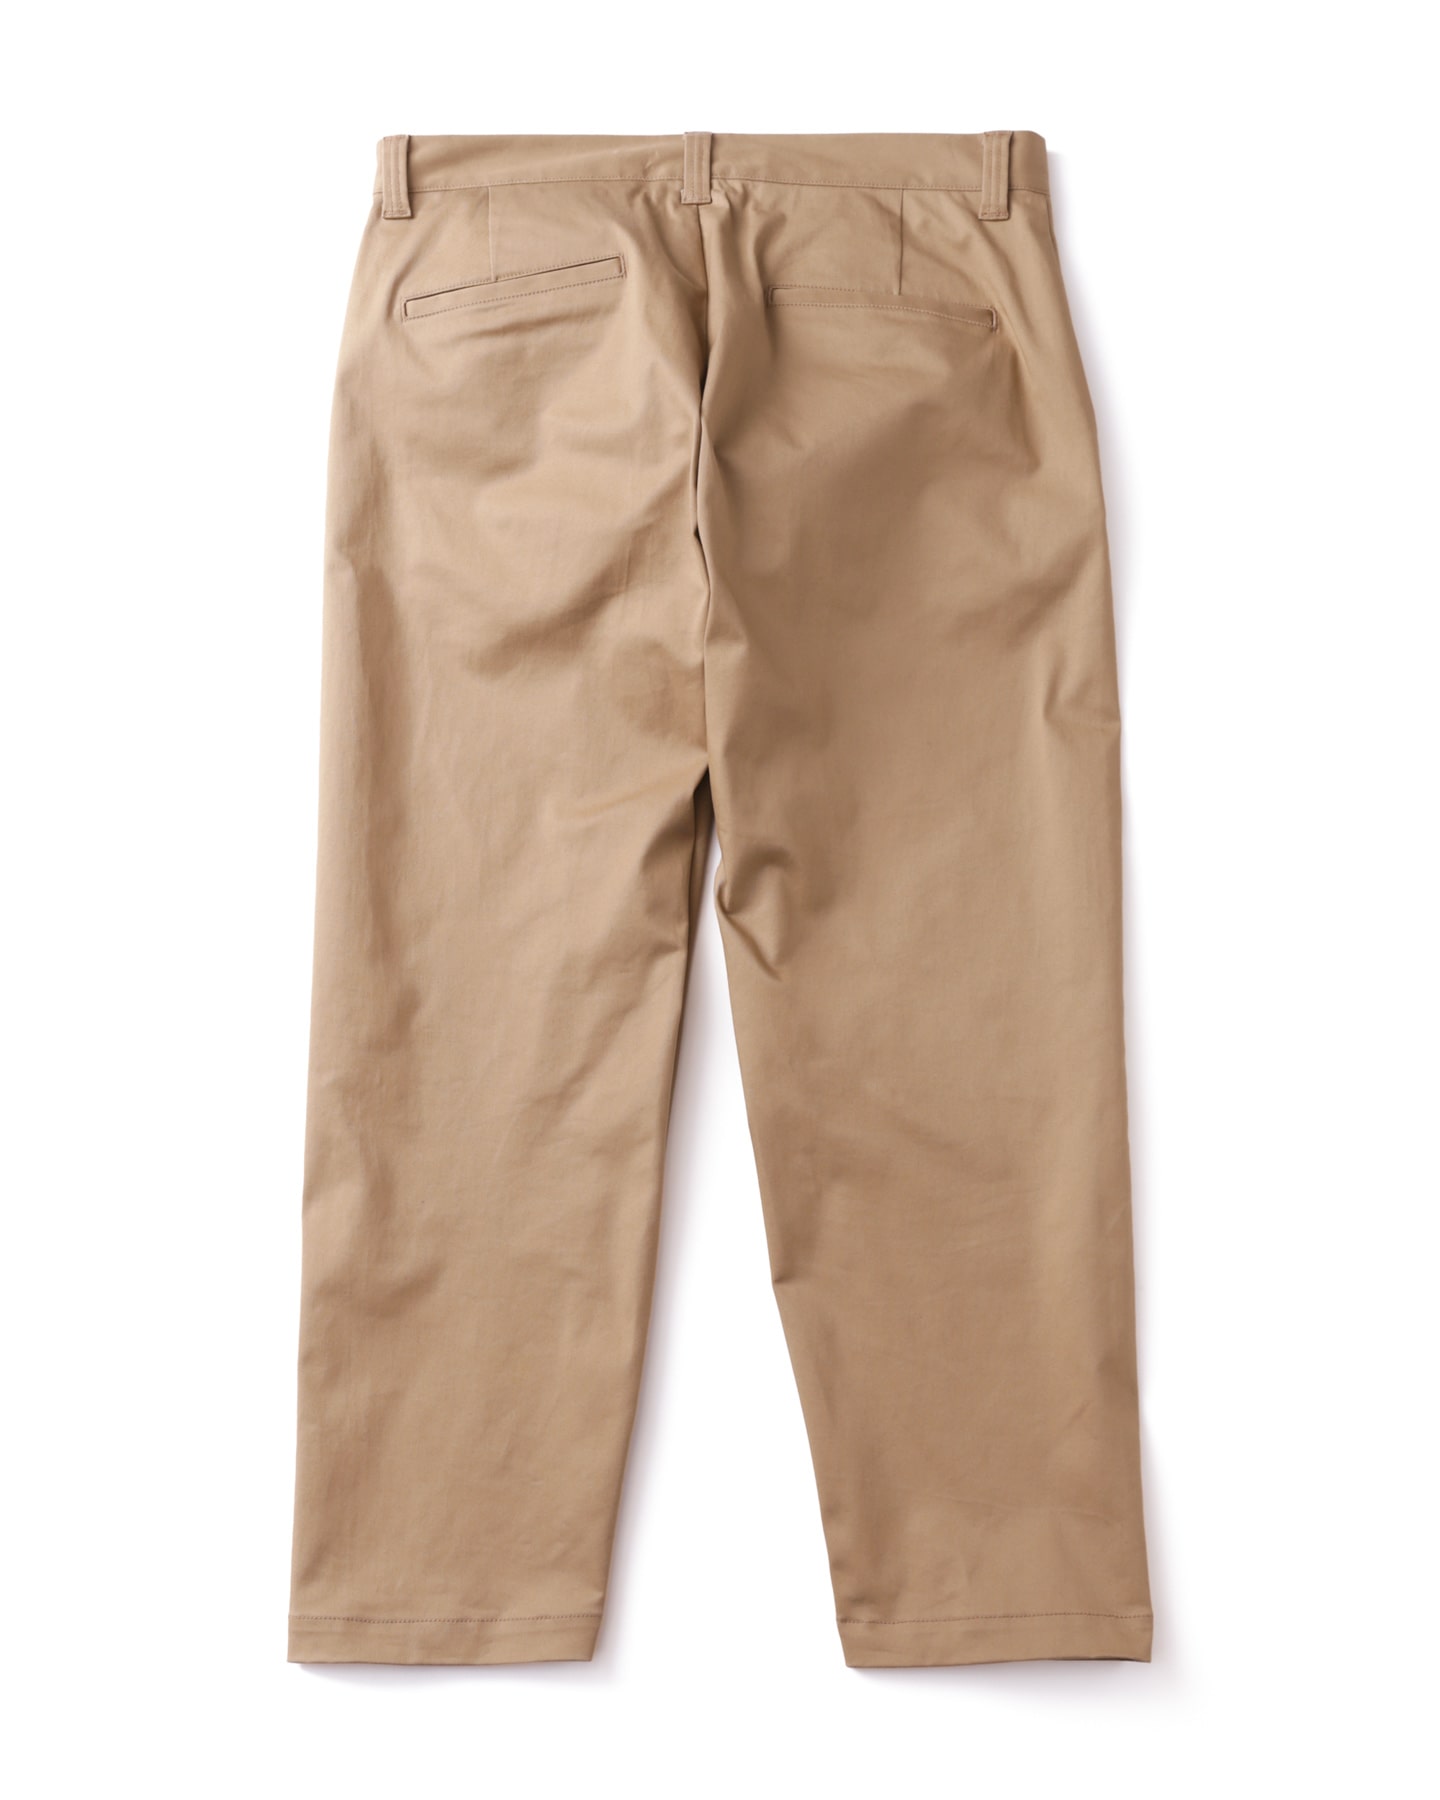 SOPH. | STRETCH CHINO WIDE CROPPED PANTS(M BEIGE):